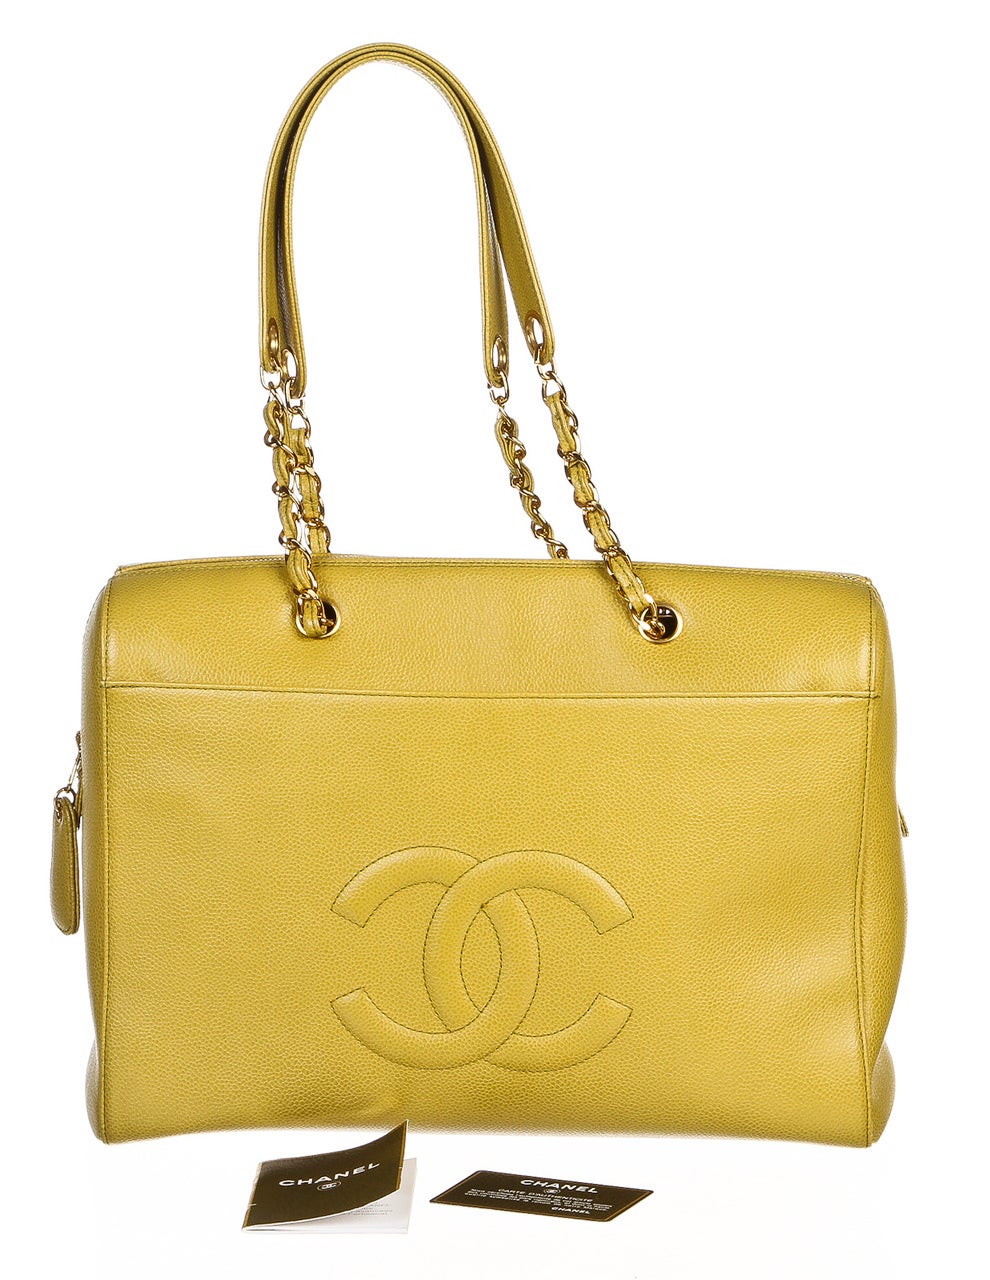 Chanel Lime Green Caviar Leather Large Shoulder Handbag In Good Condition For Sale In Corona Del Mar, CA